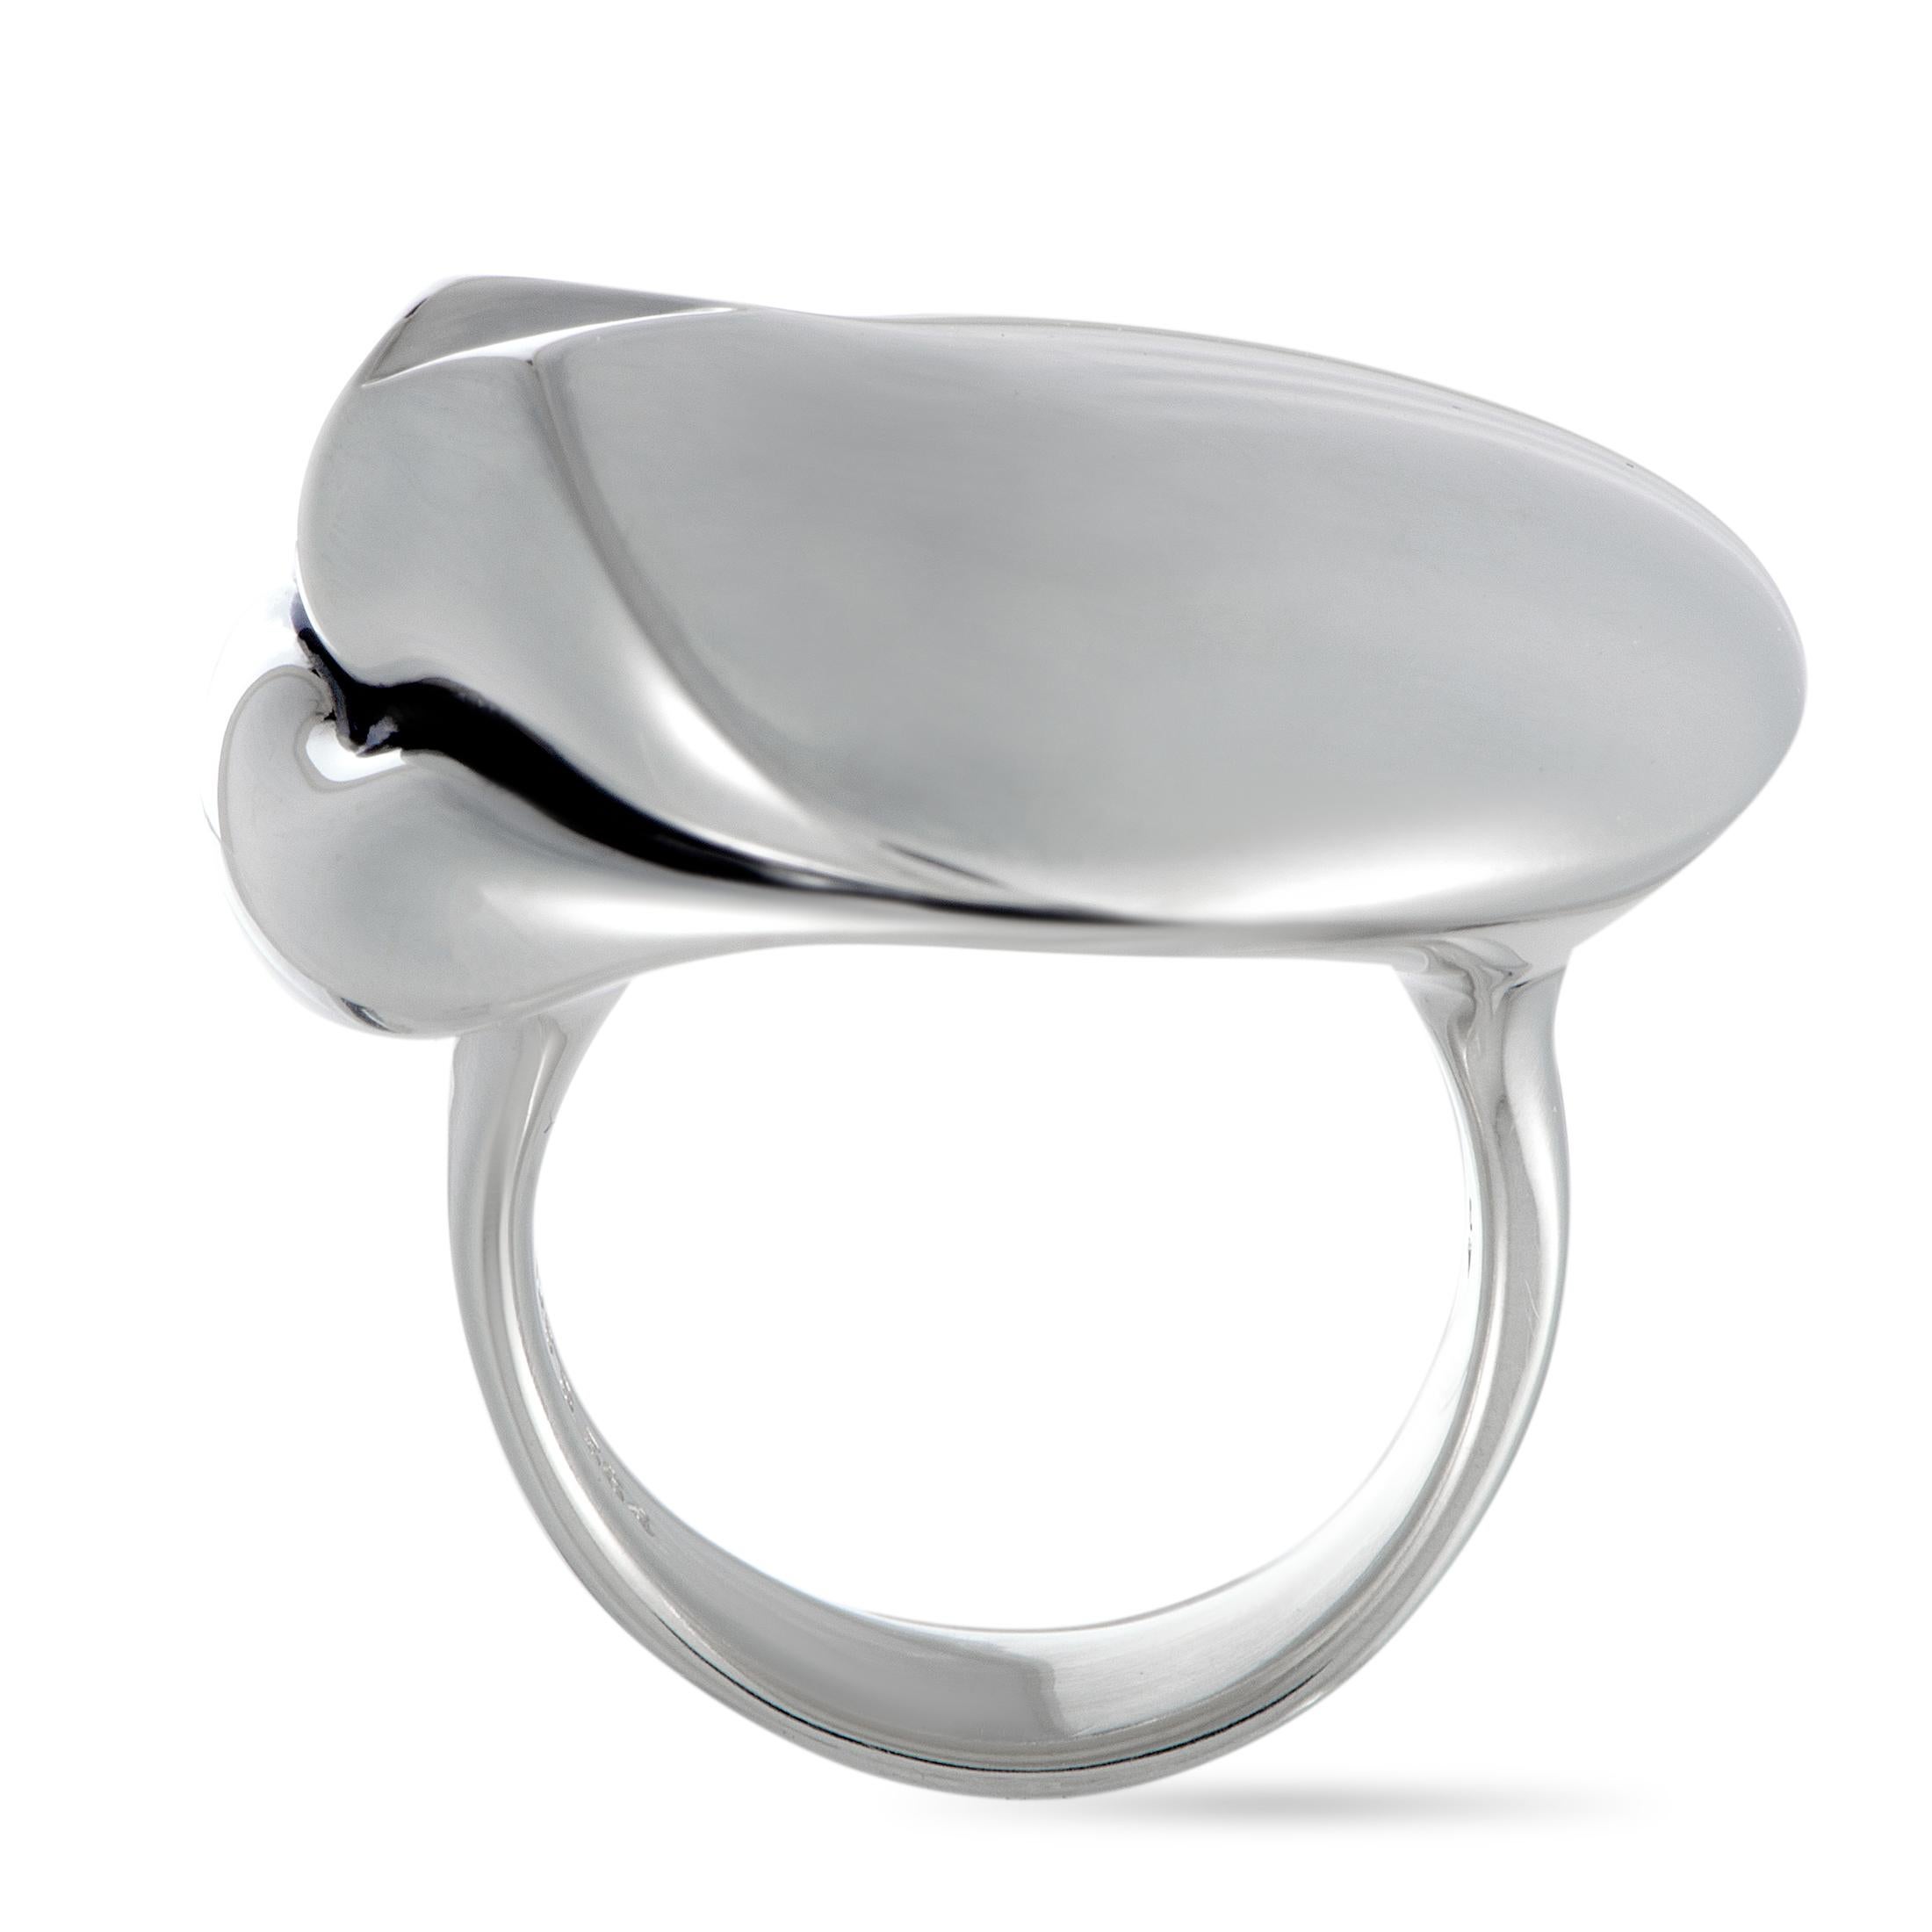 This Georg Jensen ring is crafted from silver and weighs 24.1 grams. The ring boasts band thickness of 4 mm and top height of 10 mm, while top dimensions measure 30 by 30 mm.

Offered in brand new condition, this item includes the manufacturer’s